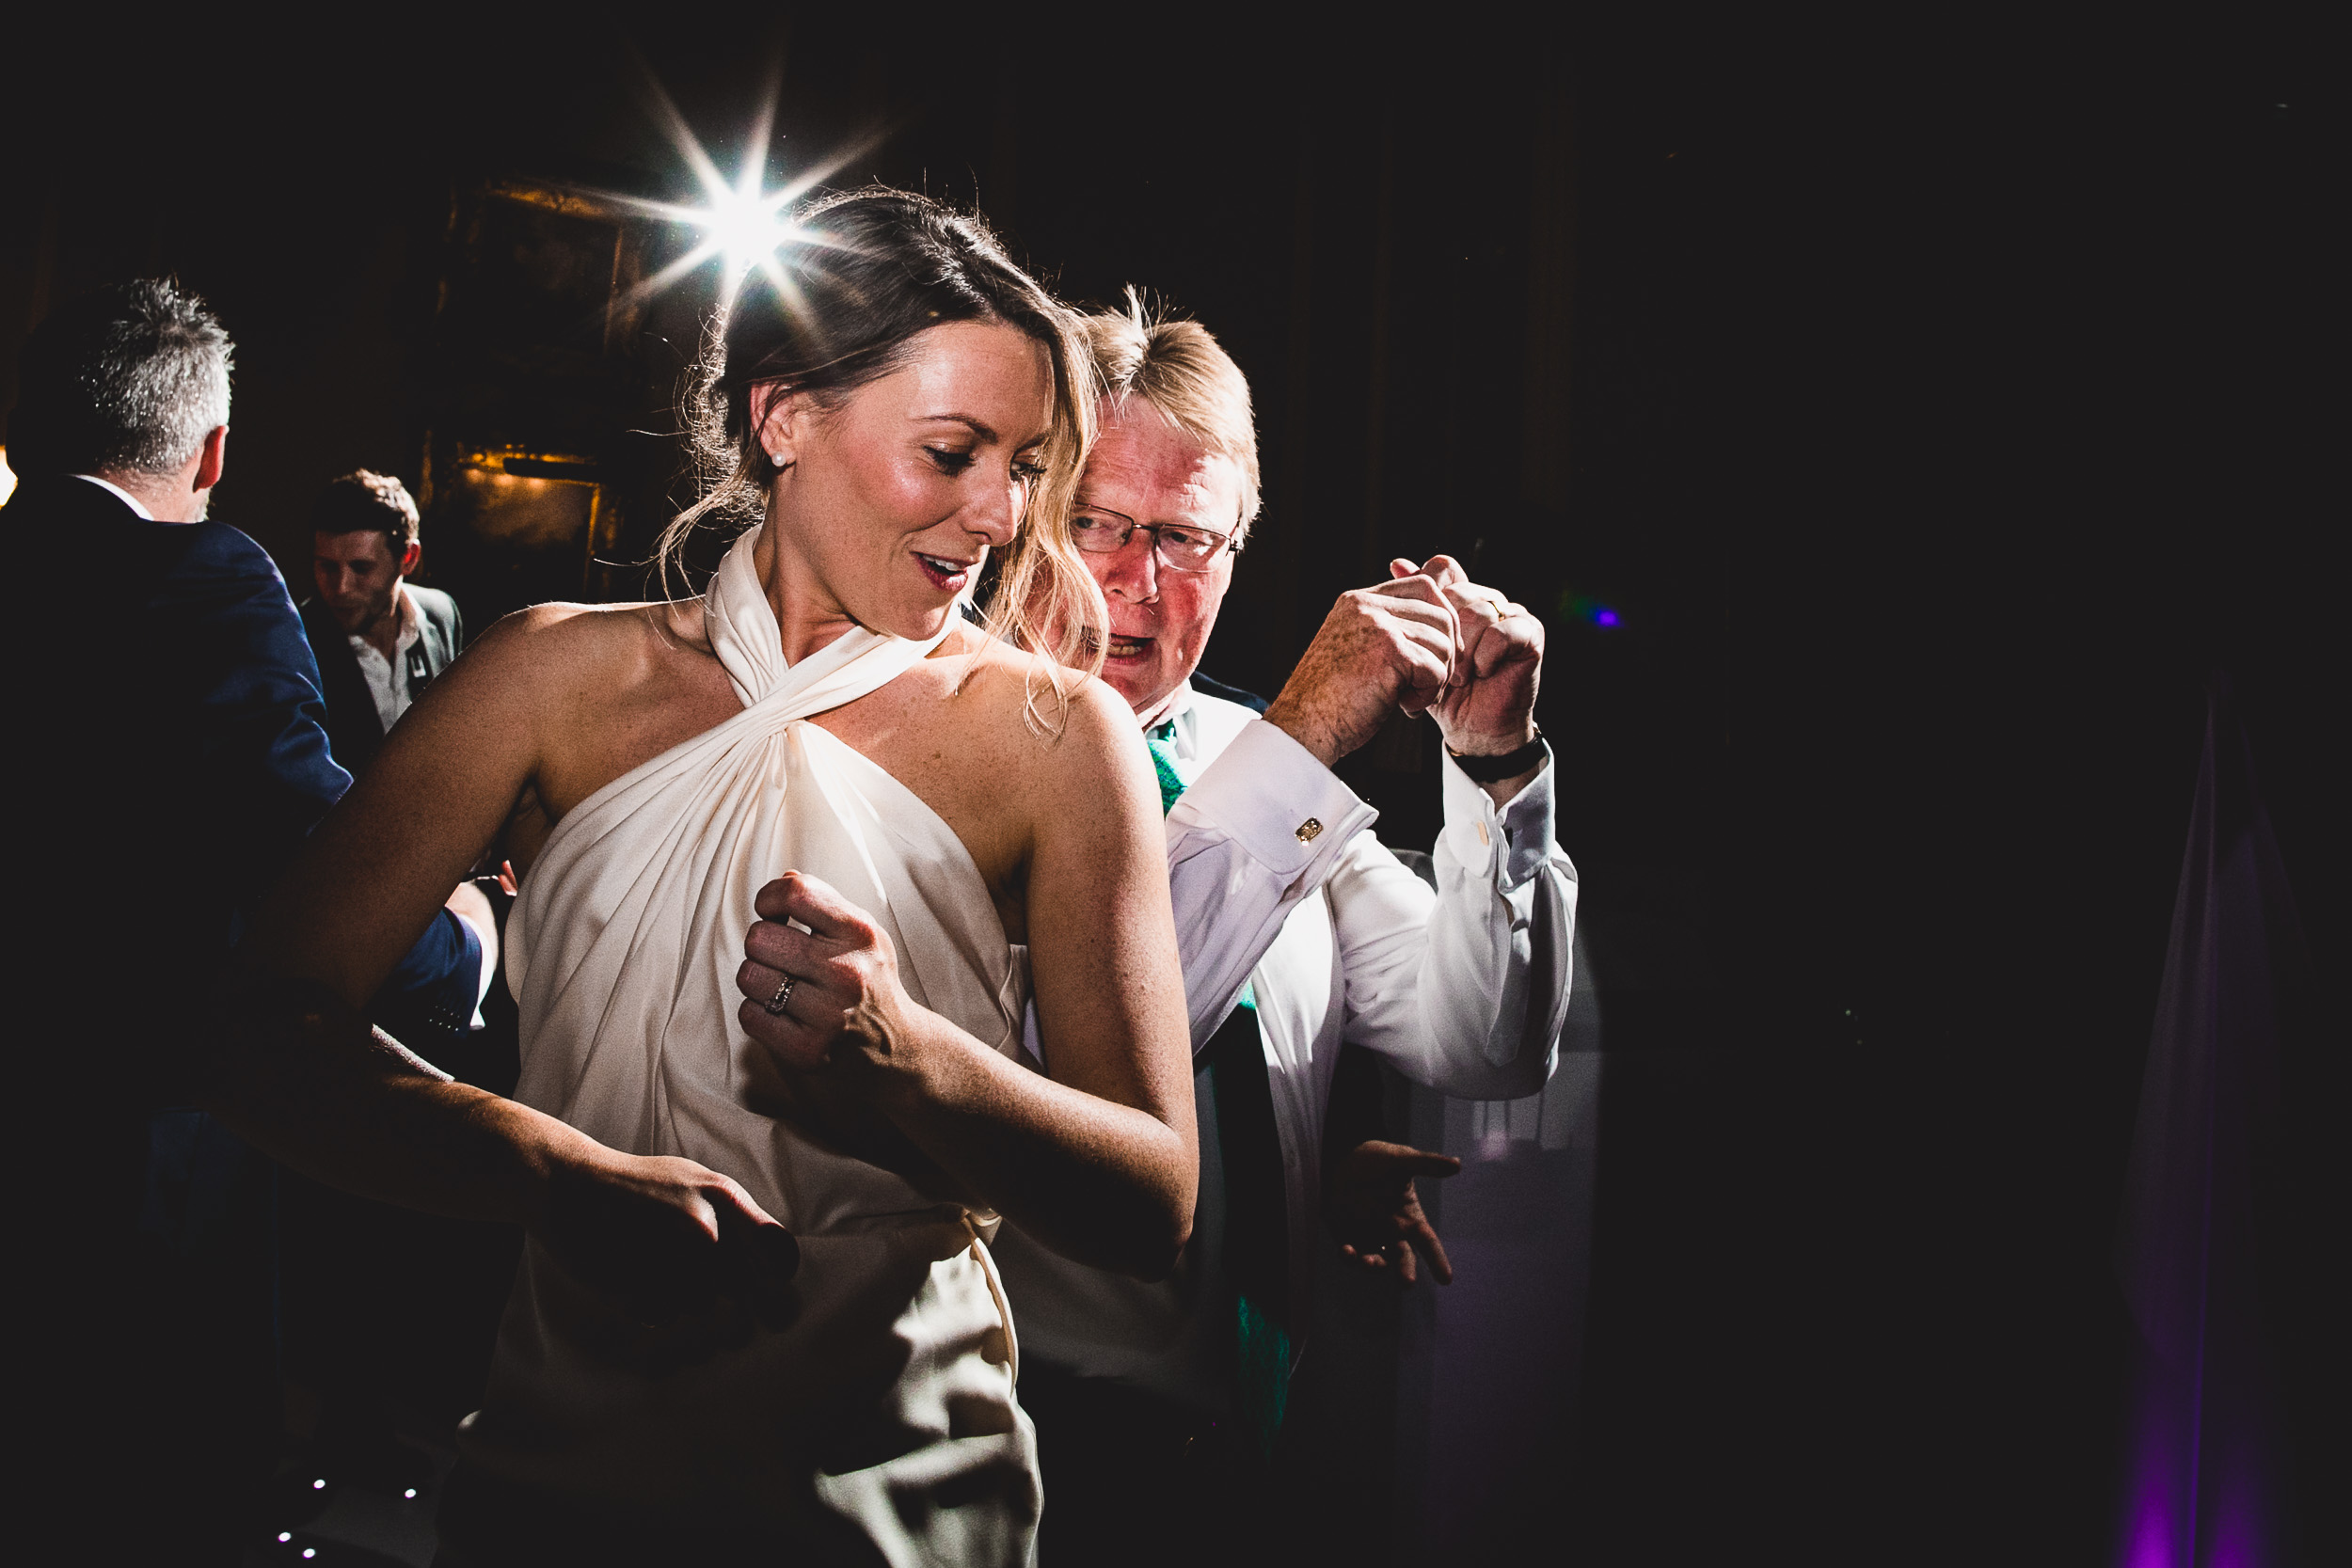 A groom and his bride dancing at their wedding reception, captured by a wedding photographer.